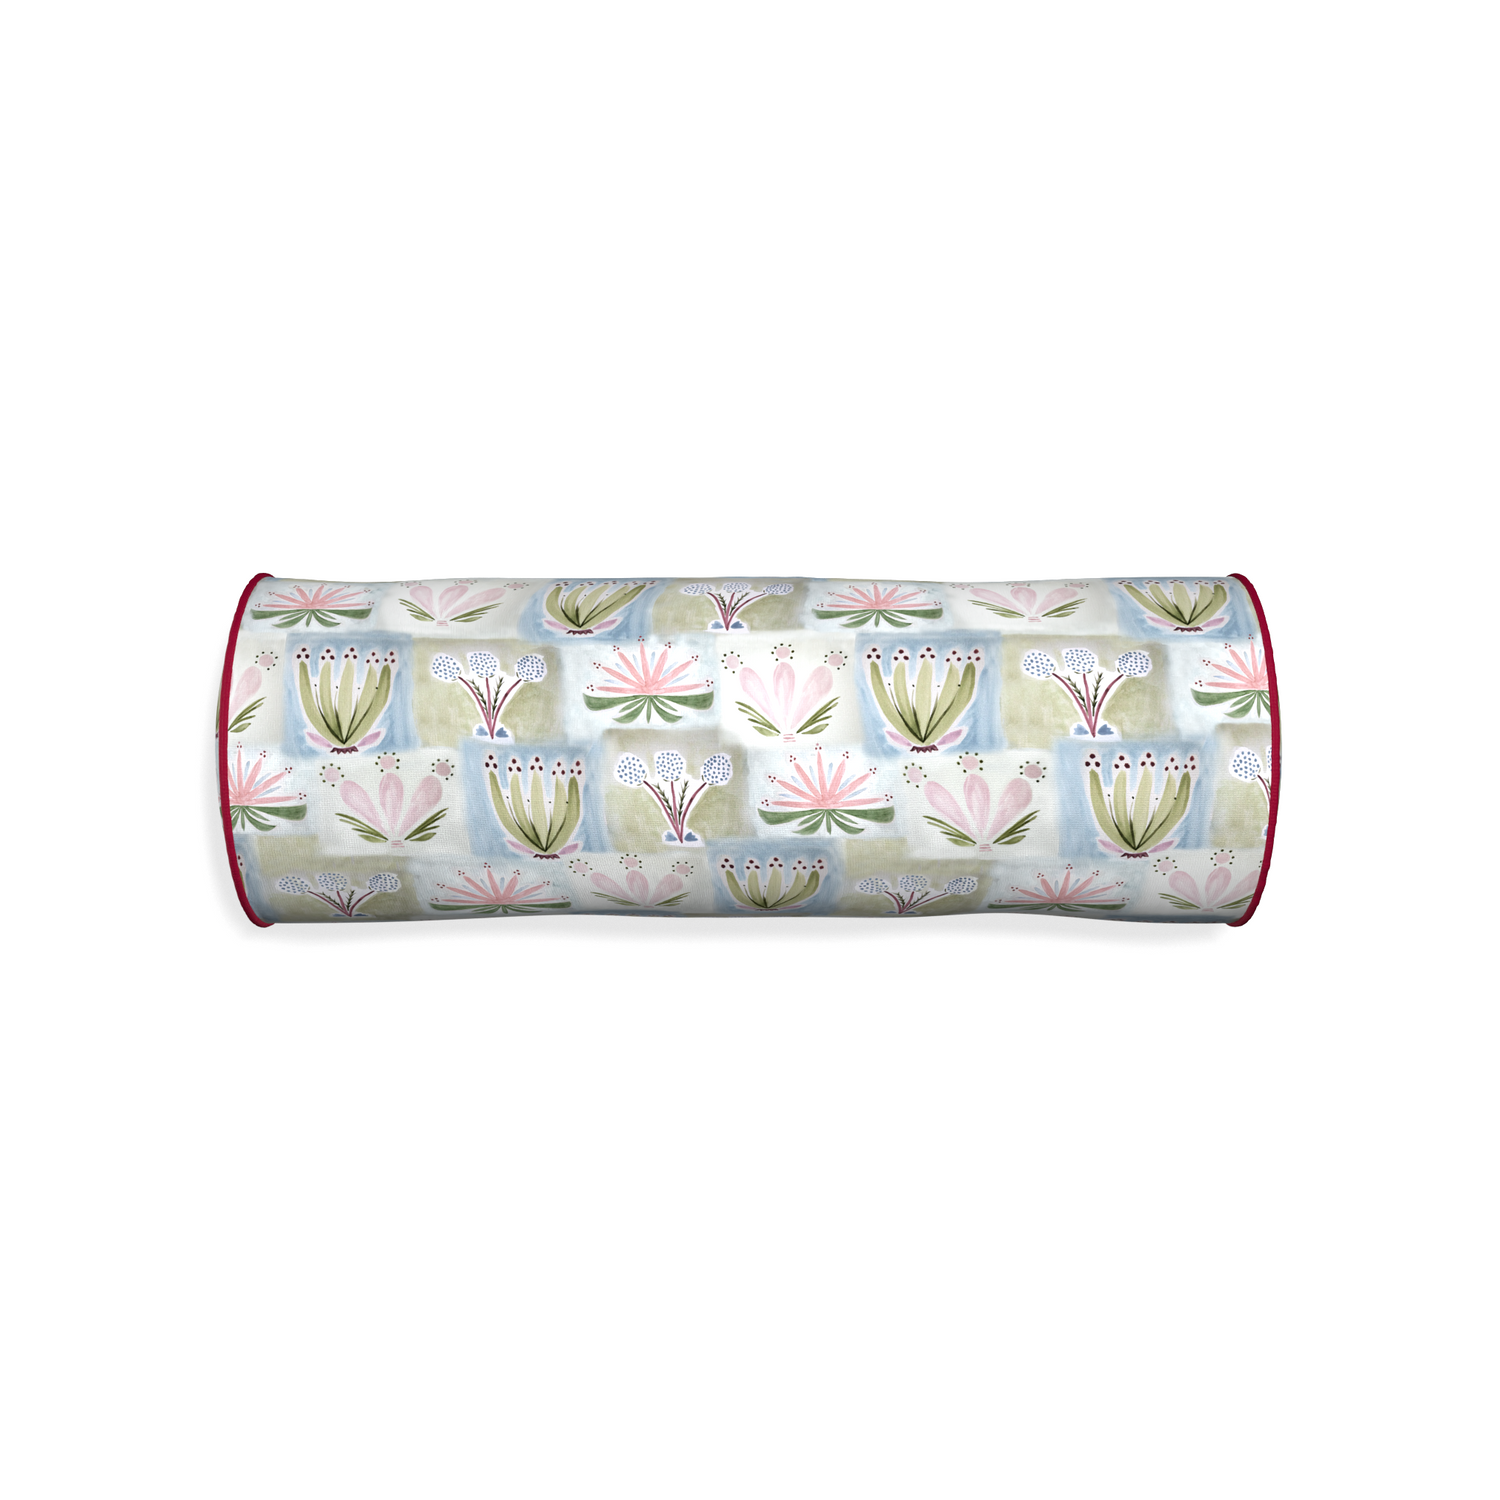 Bolster harper custom hand-painted floralpillow with raspberry piping on white background